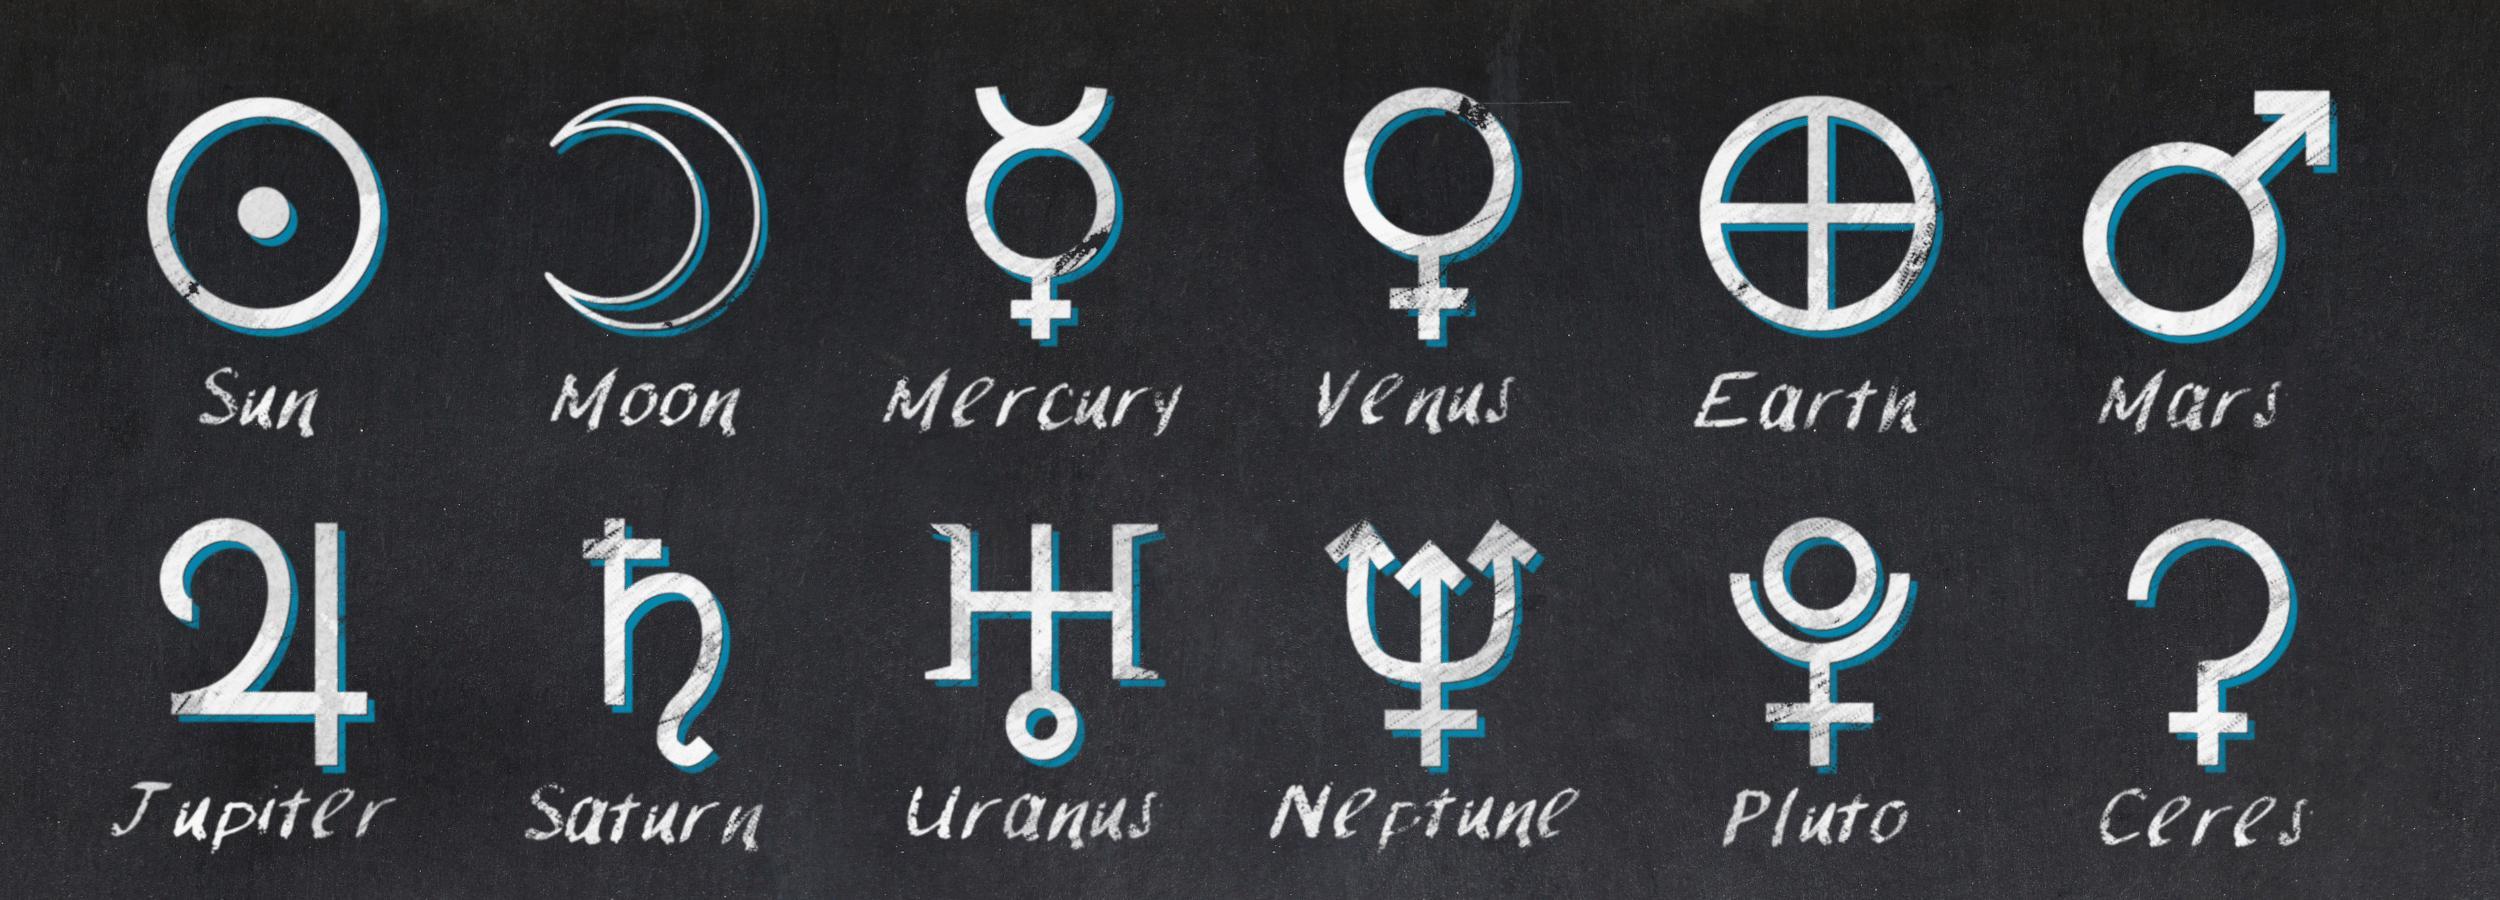 Planetary symbols used in astrology